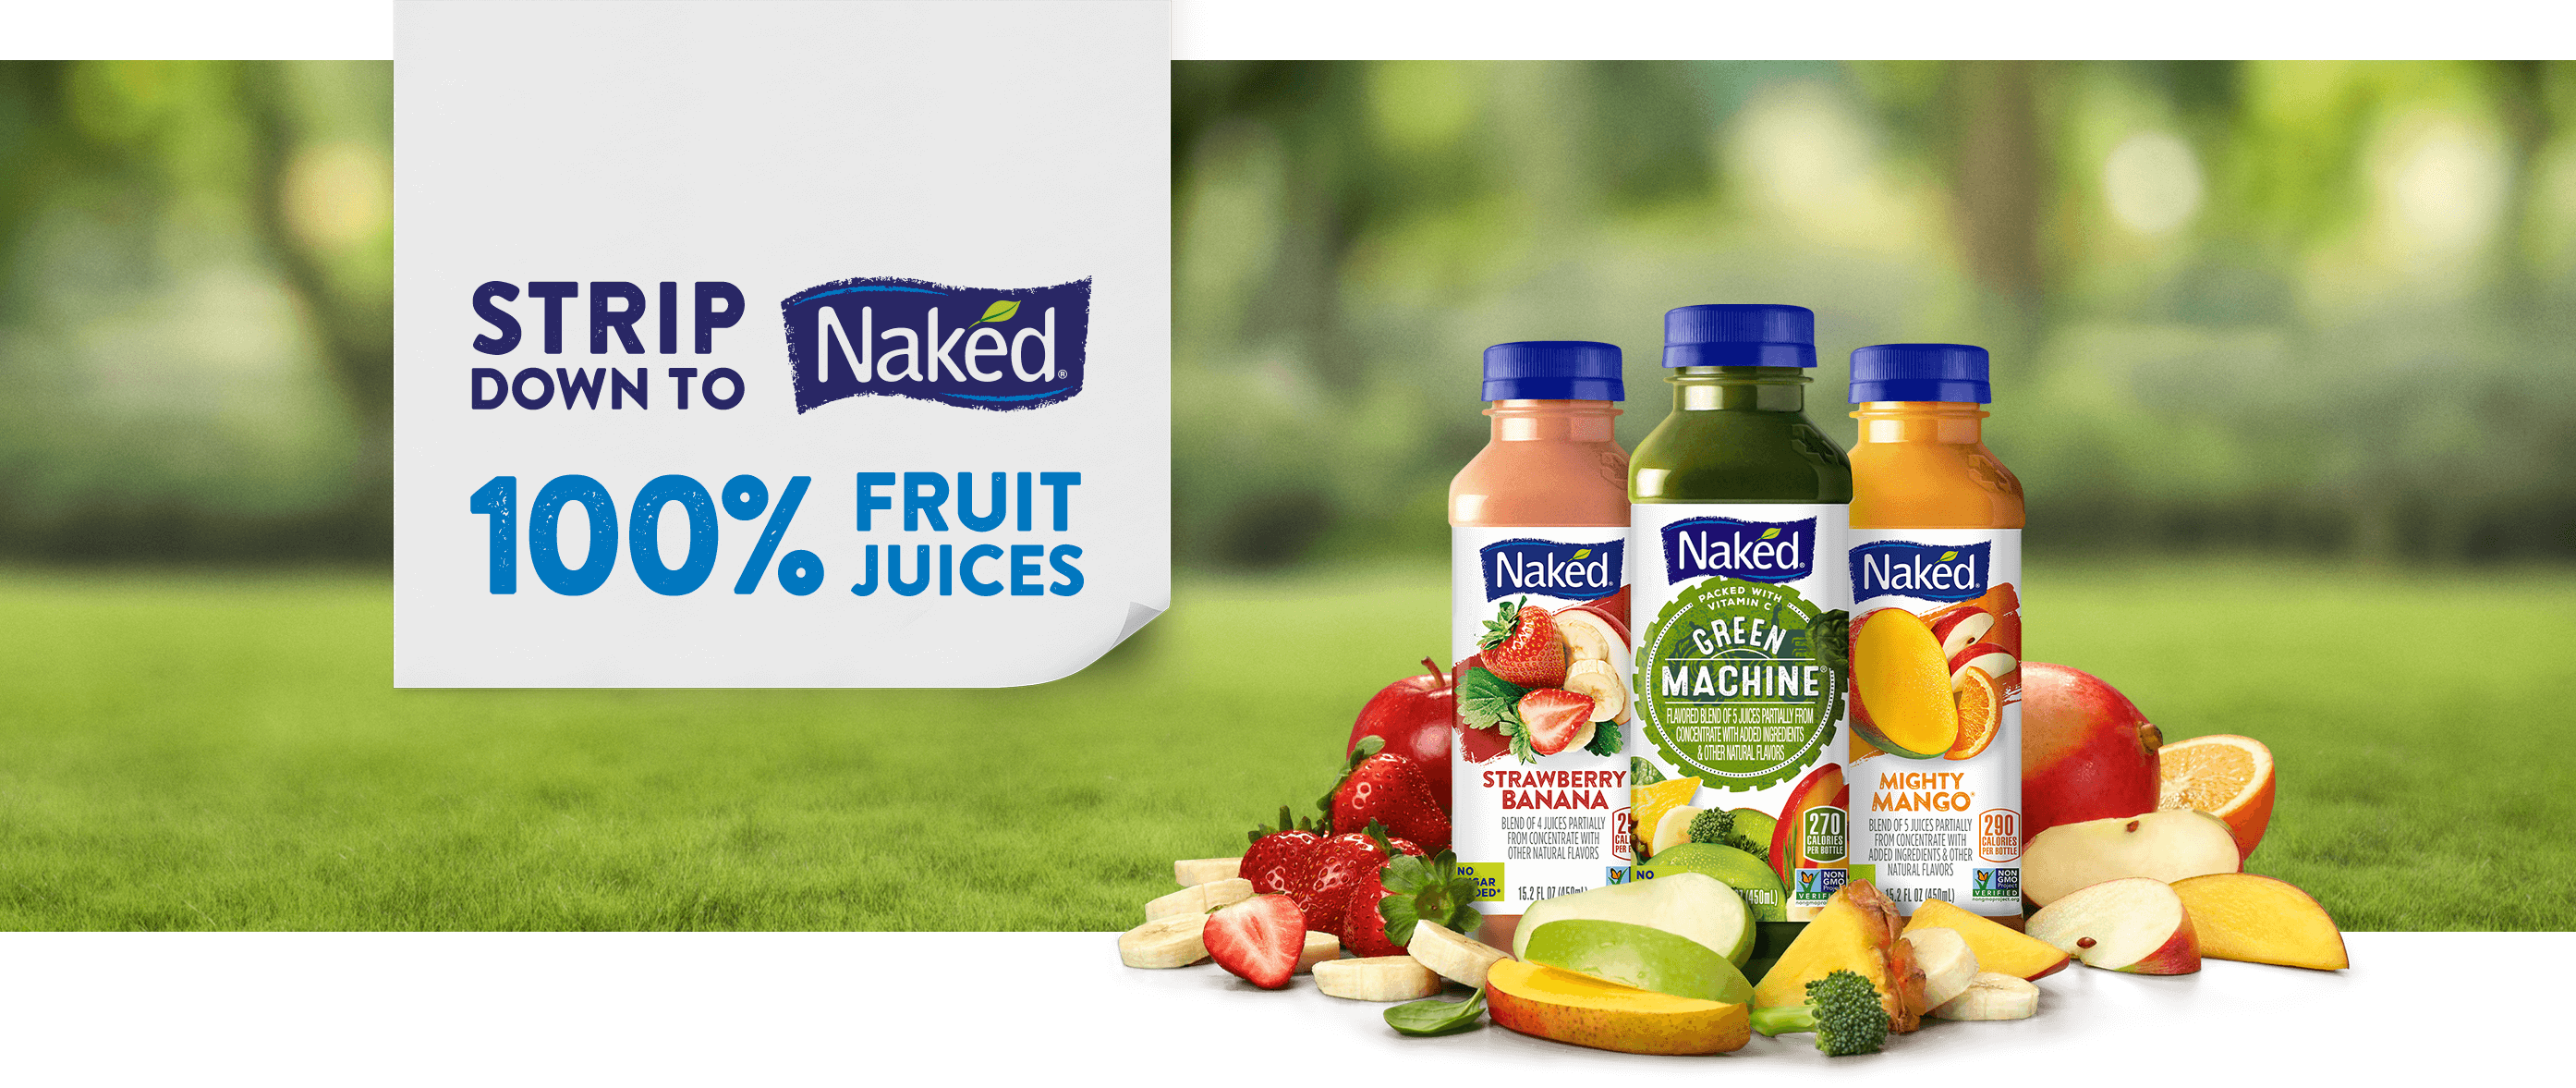 Juiced Naked Commercial